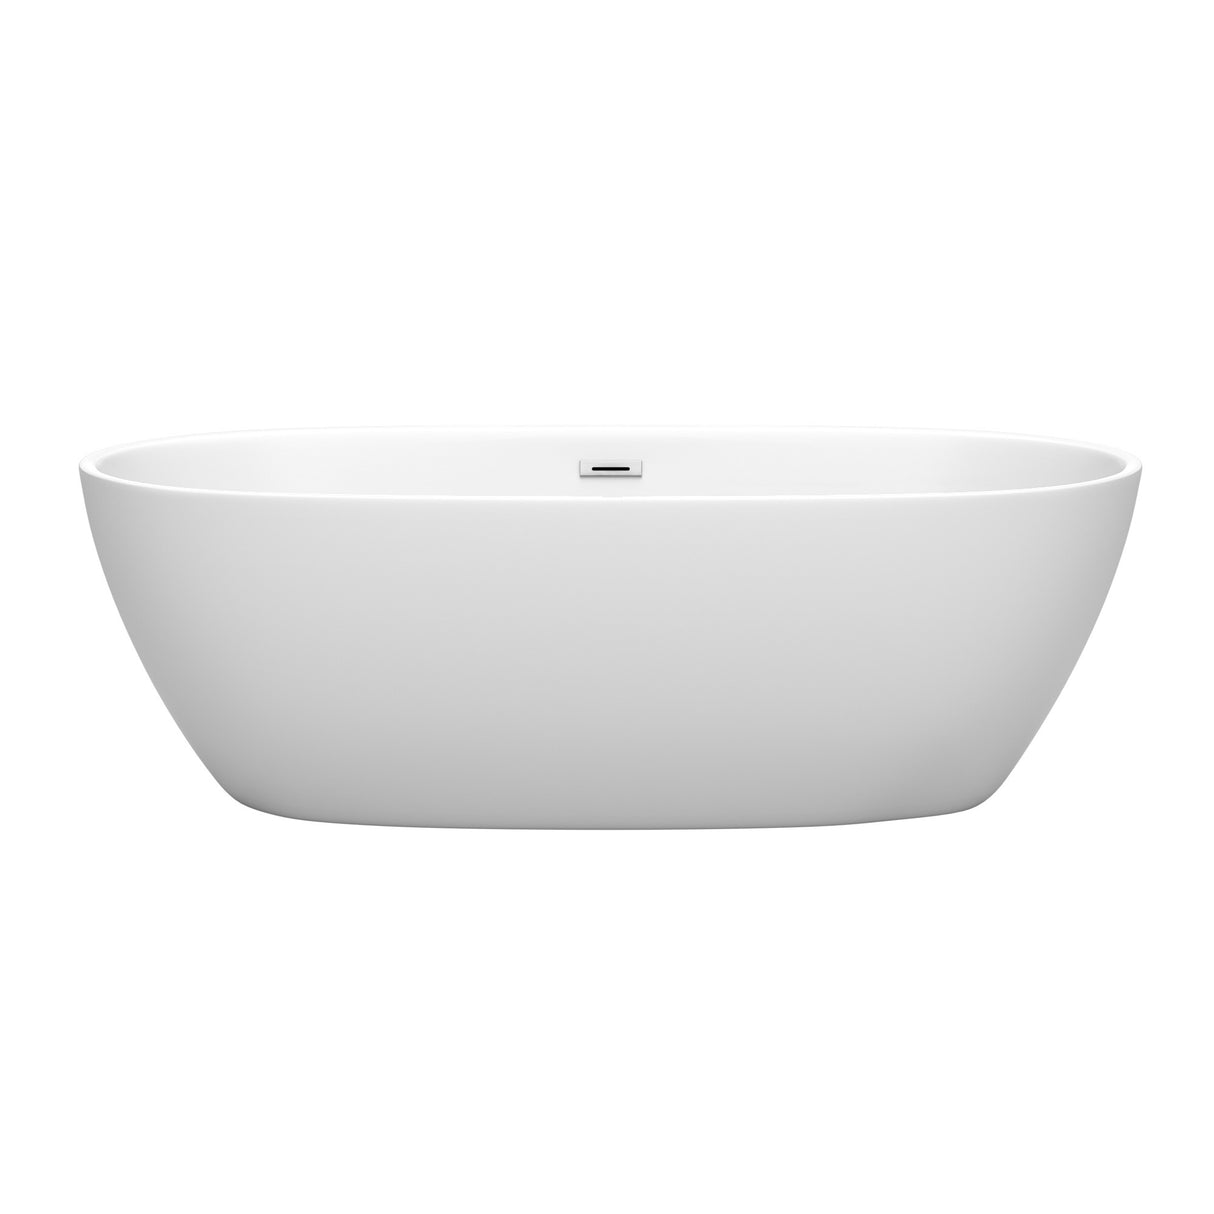 Juno 71 Inch Freestanding Bathtub in Matte White with Polished Chrome Drain and Overflow Trim